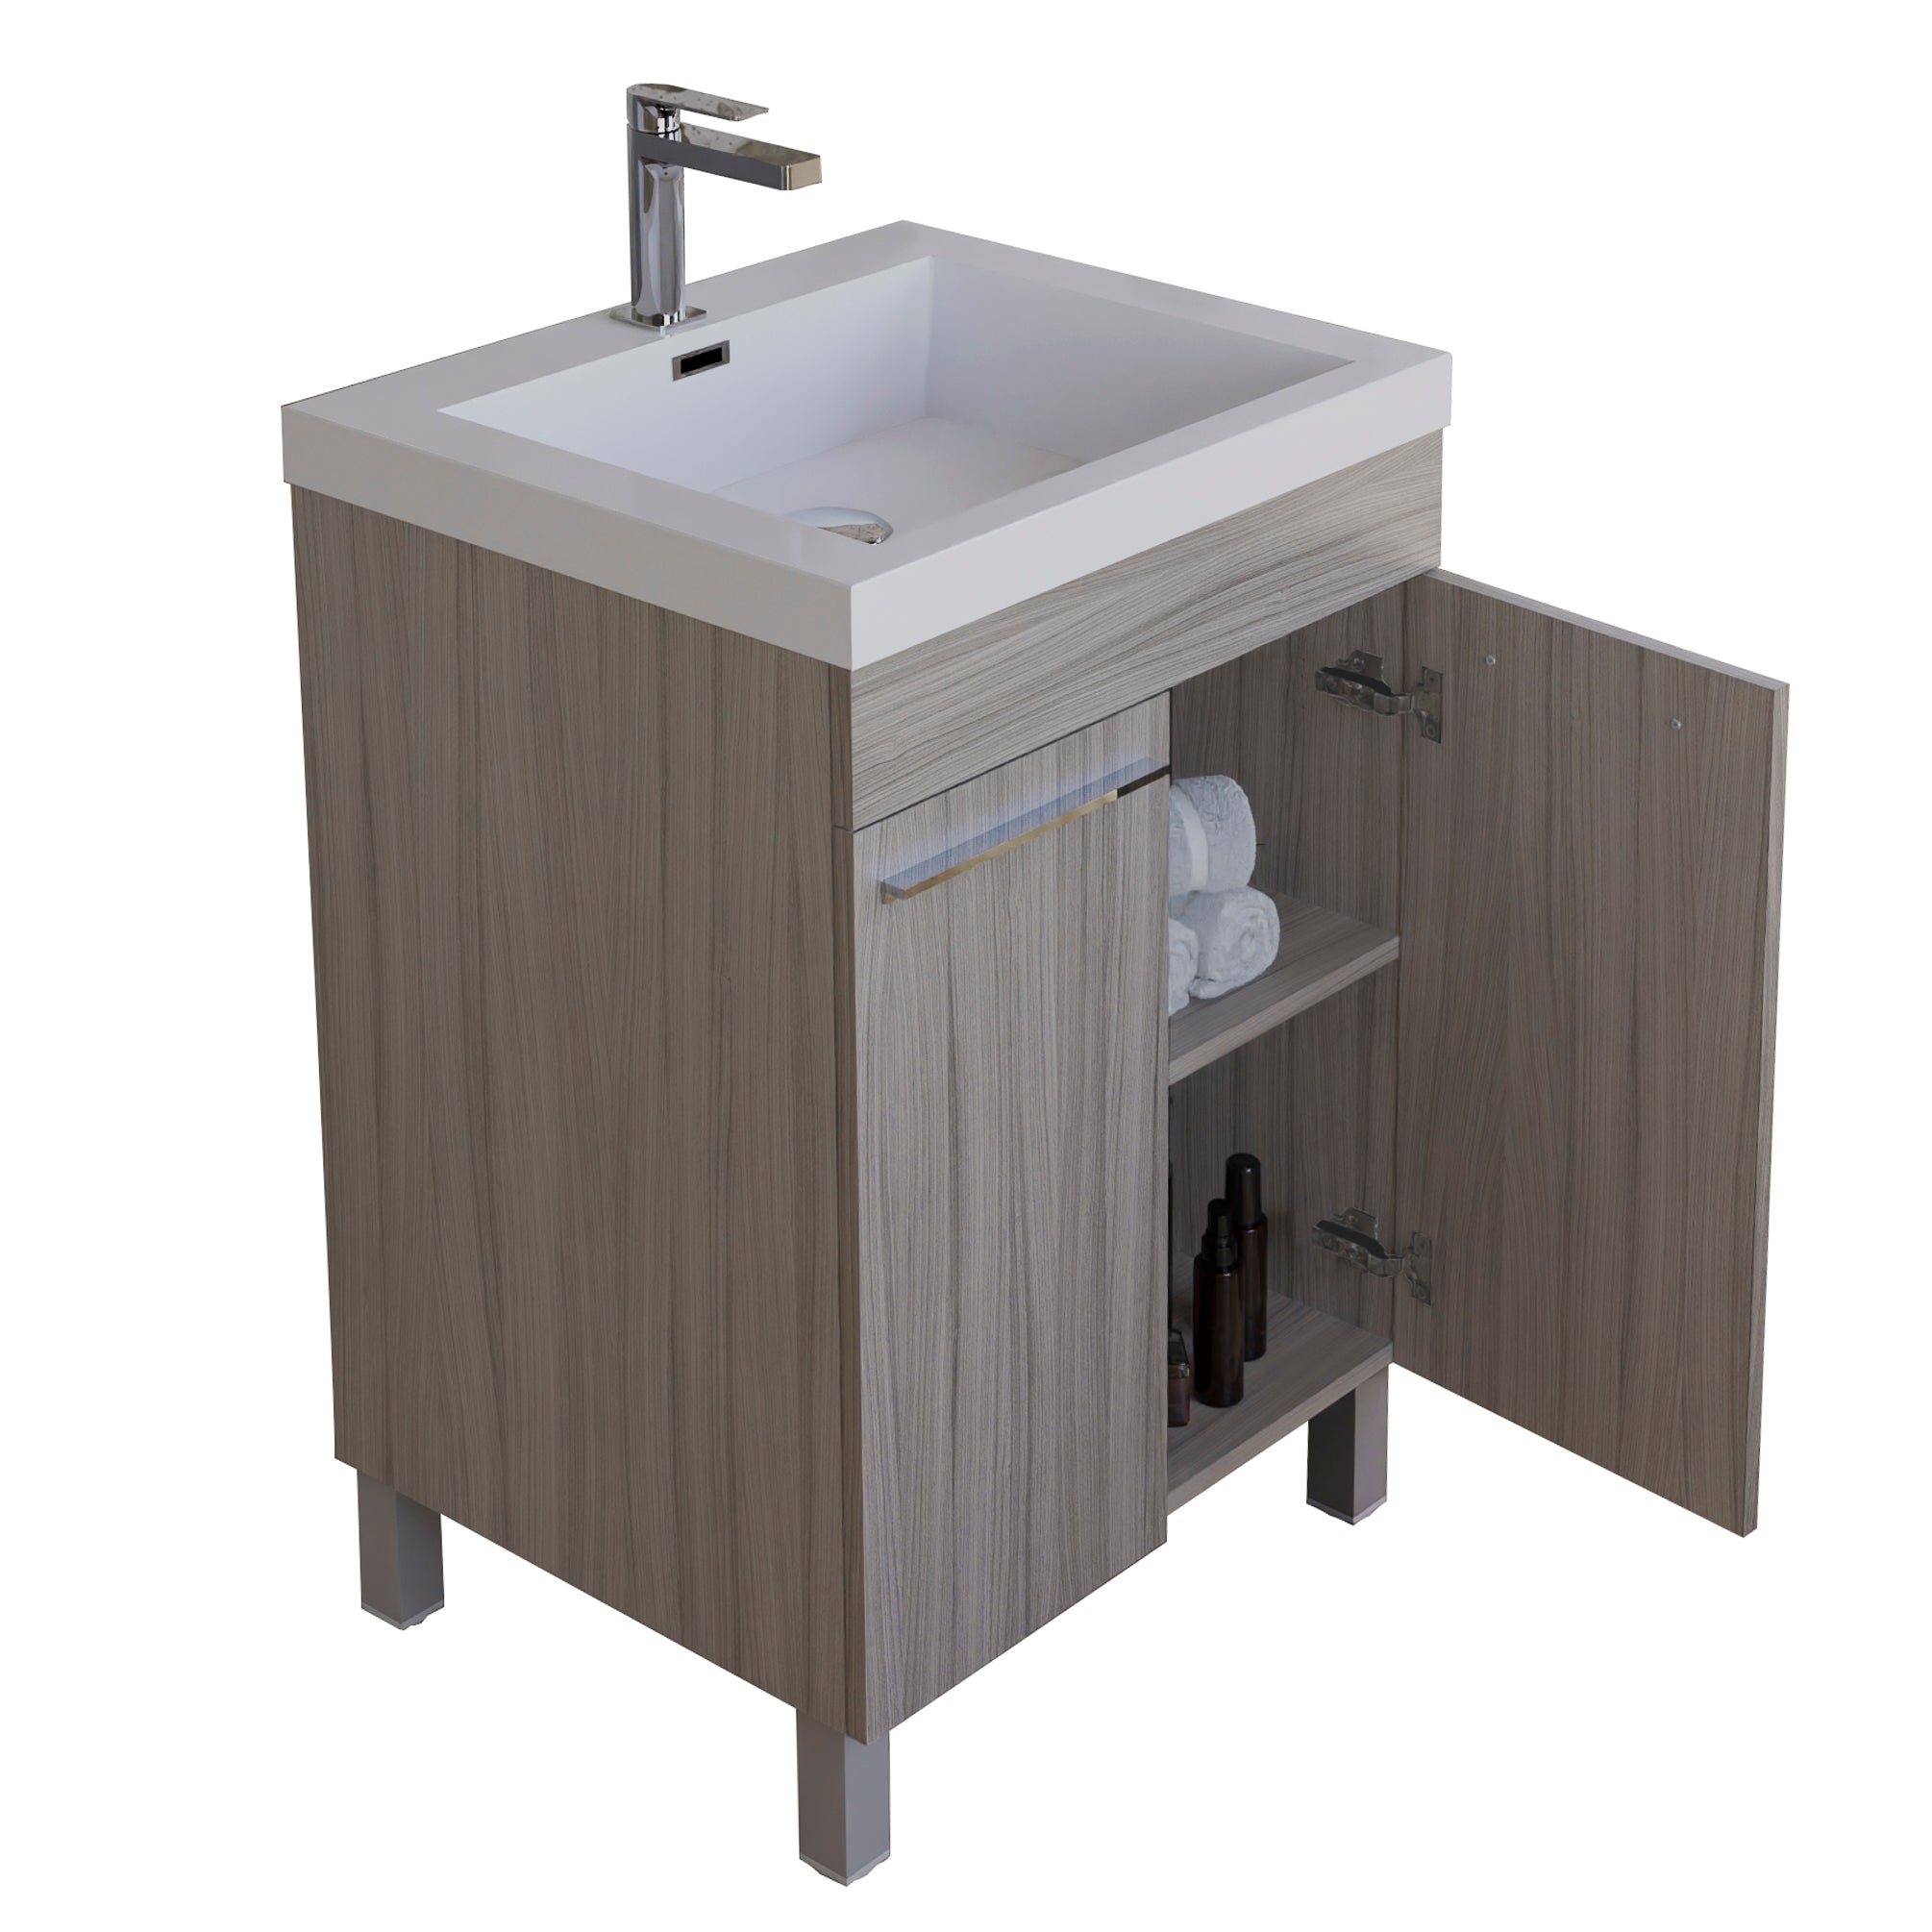 Ocean 23.5 Nilo Grey Wood Texture Cabinet, Square Cultured Marble Sink, Free Standing Vanity Set